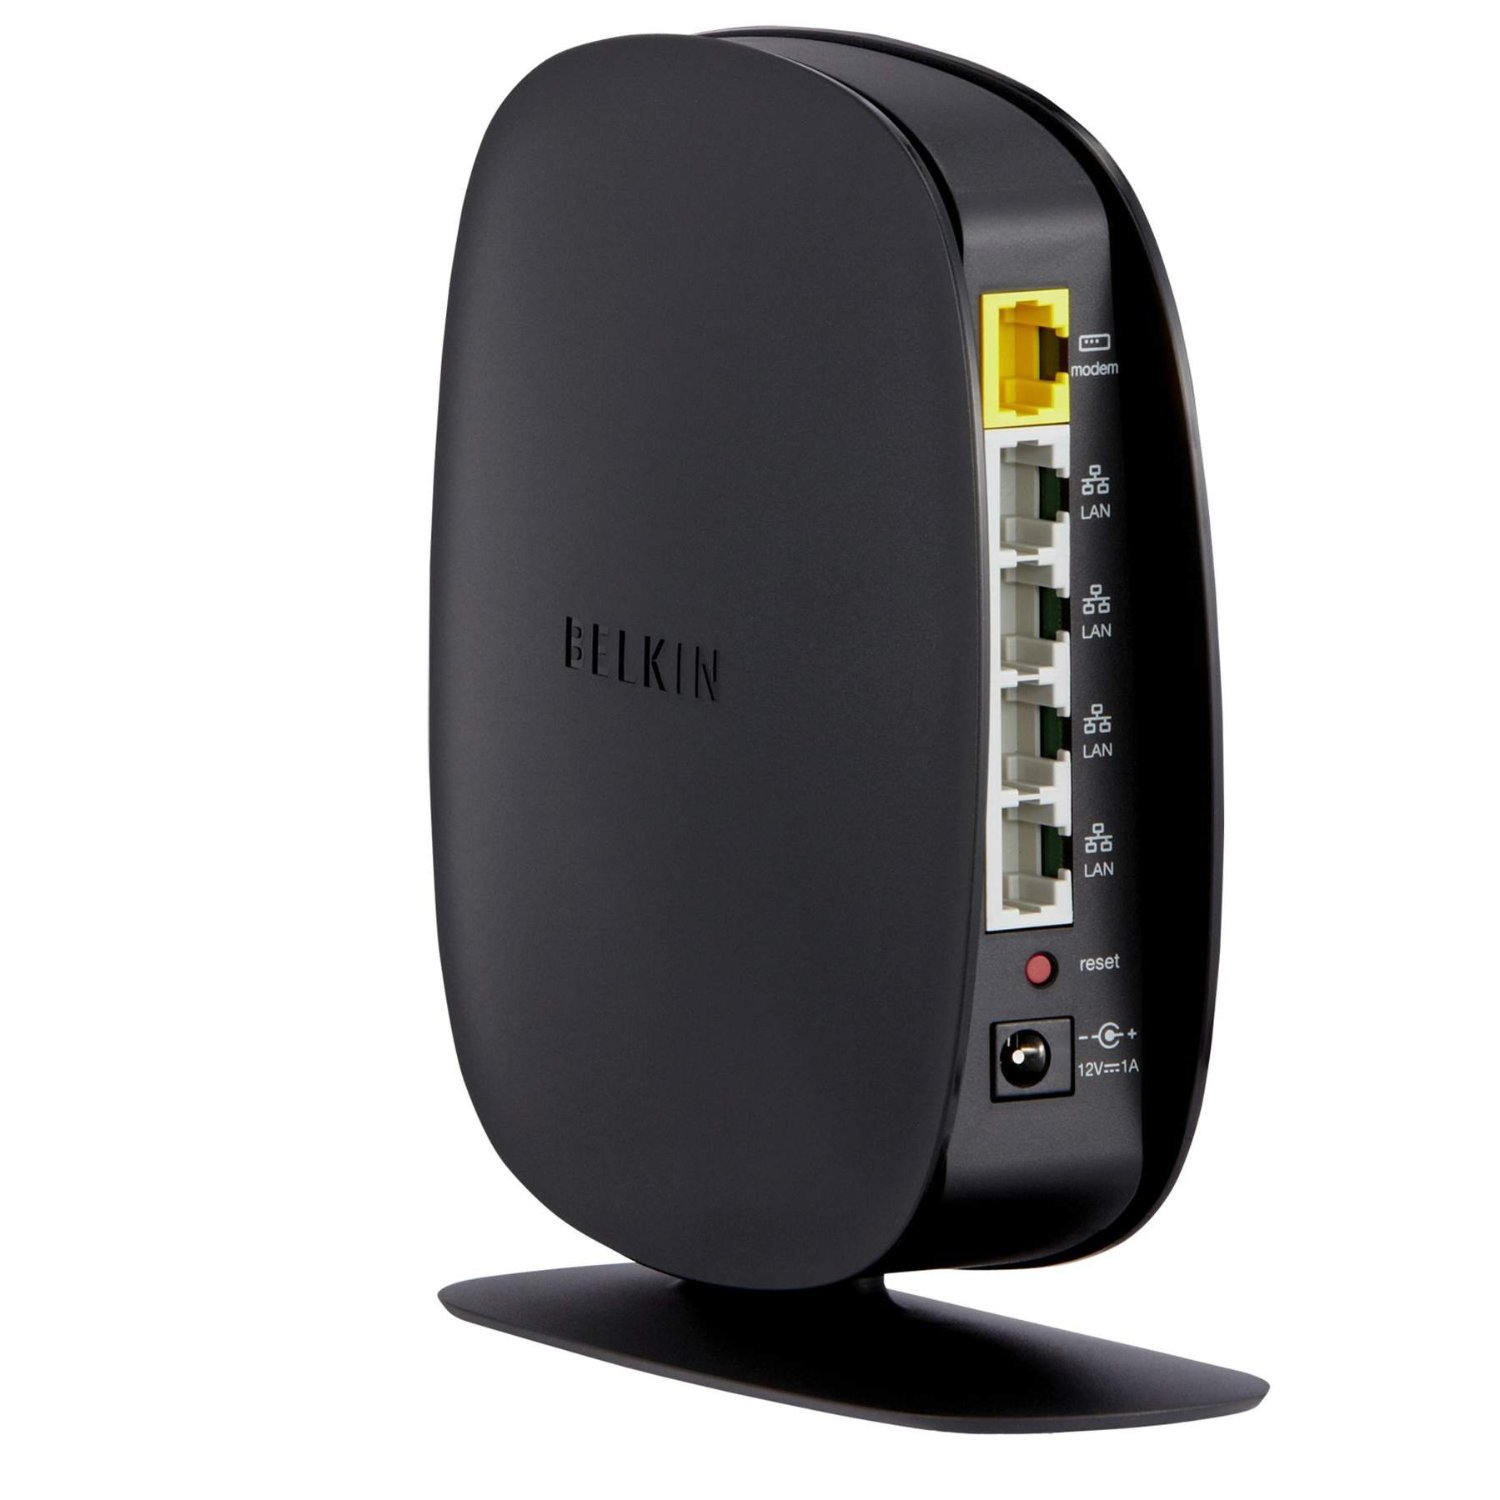 http://thetechjournal.com/wp-content/uploads/images/1108/1314410232-belkin-n150-latest-generation-wireless-n-router-4.jpg